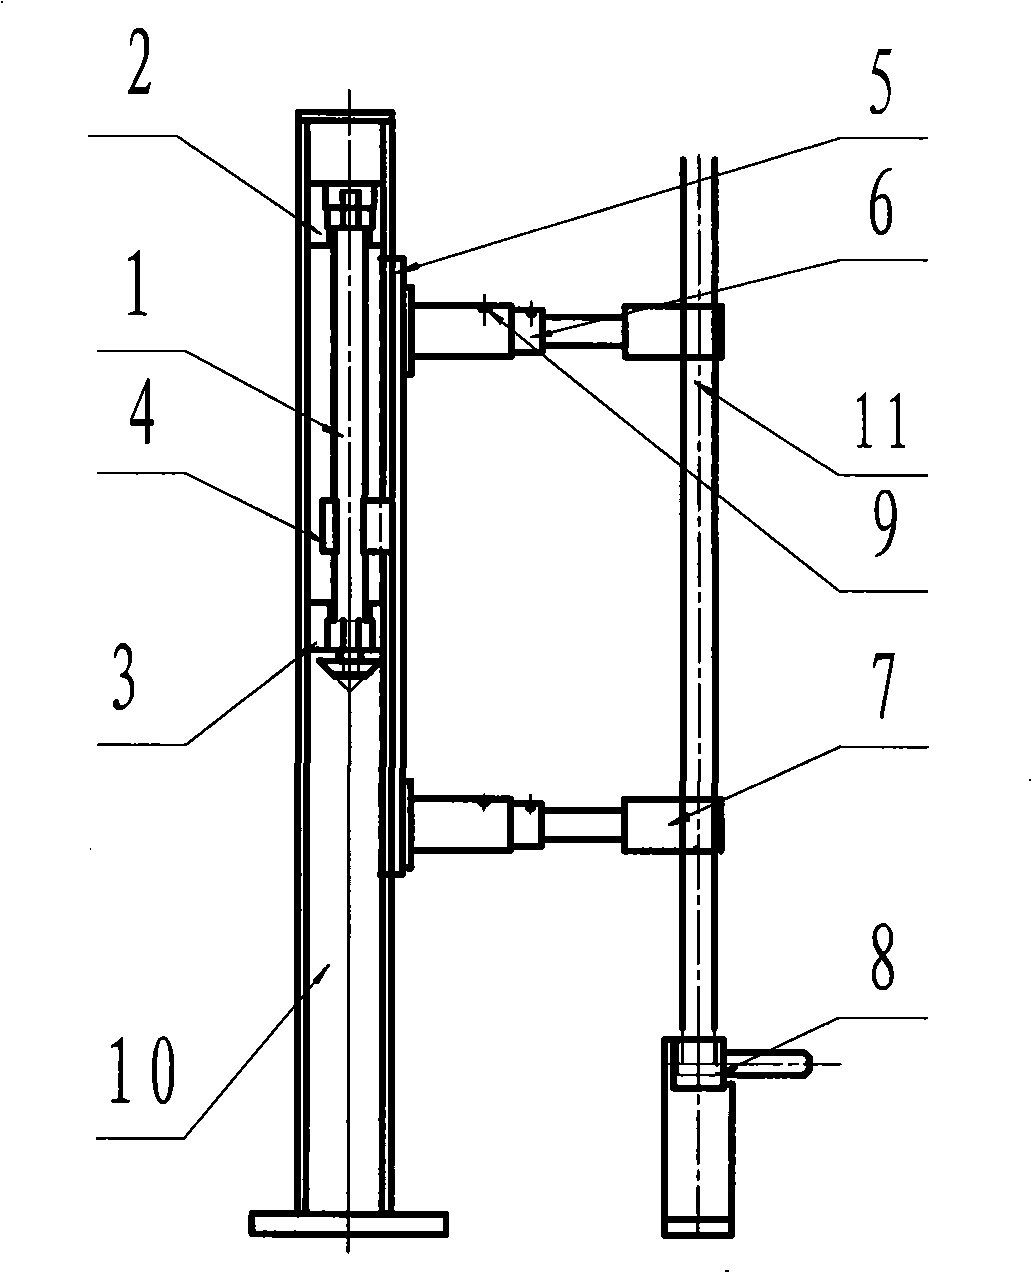 Cable and pin tube cavity contact pair as well as apparatus and method for brazing cable connector